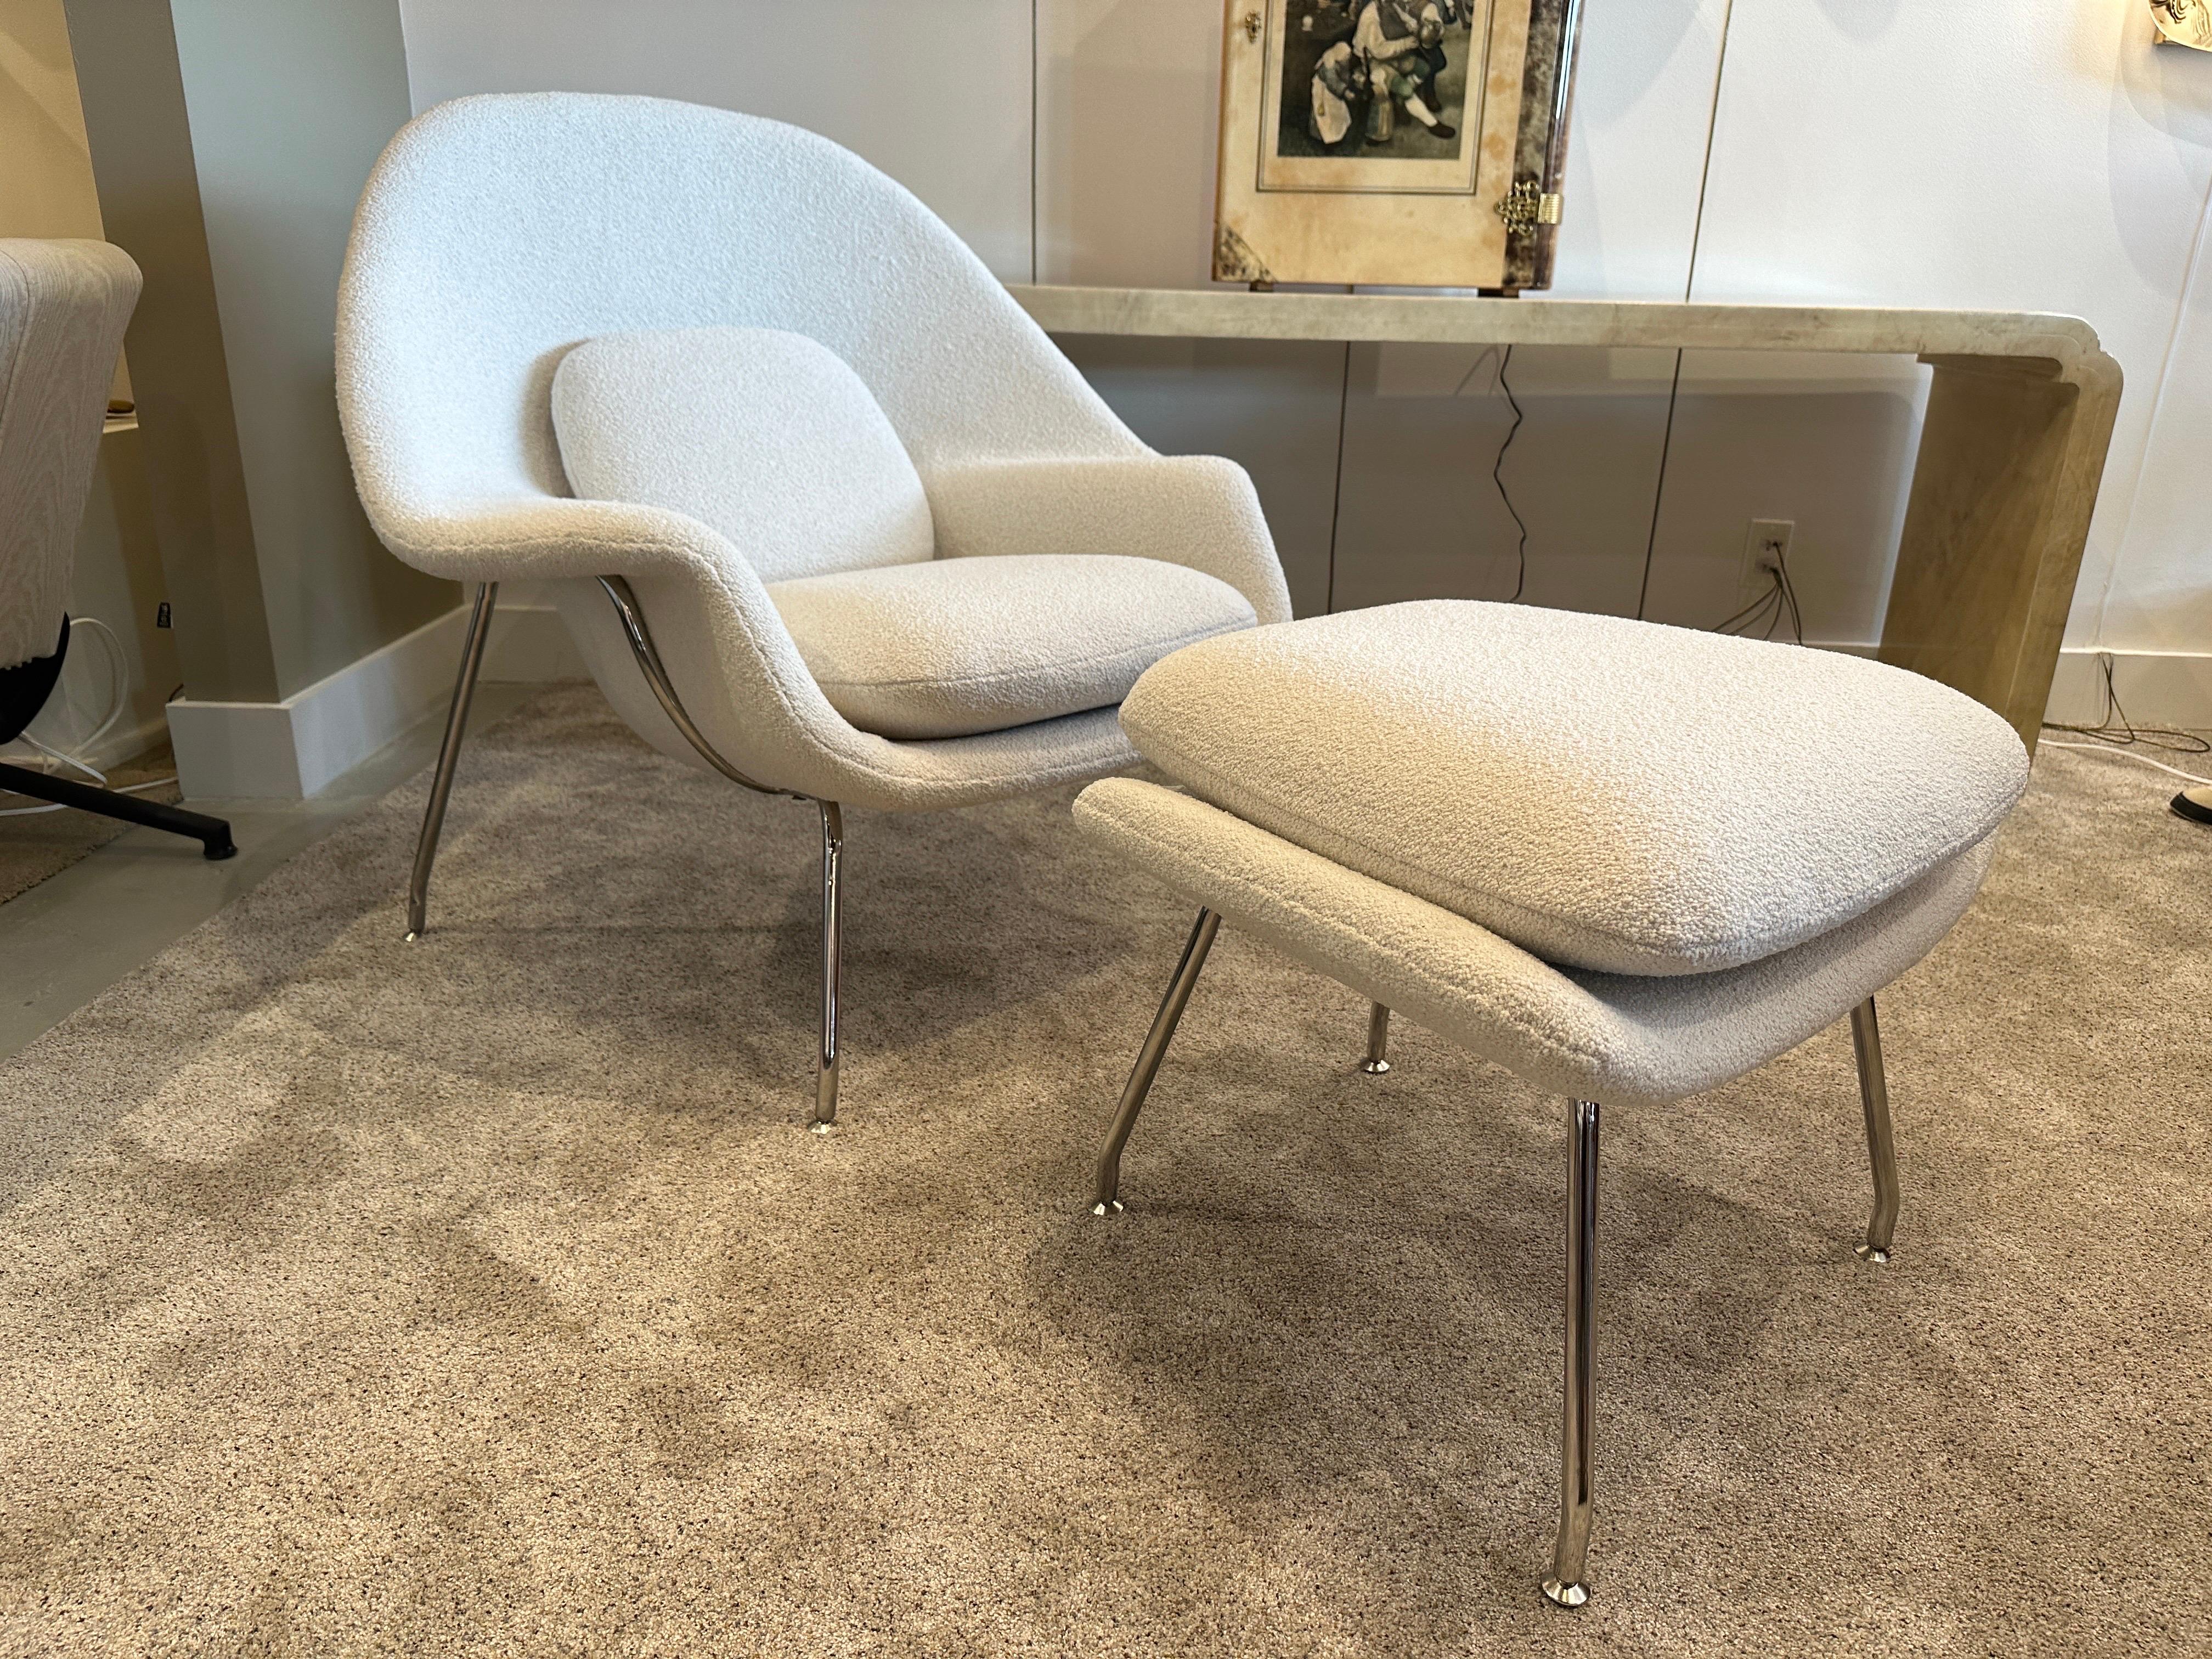 Reupholstered in fine French Boucle, this Womb chair was designed in 1948 by Eero Saarinen at Florence Knoll's request for 